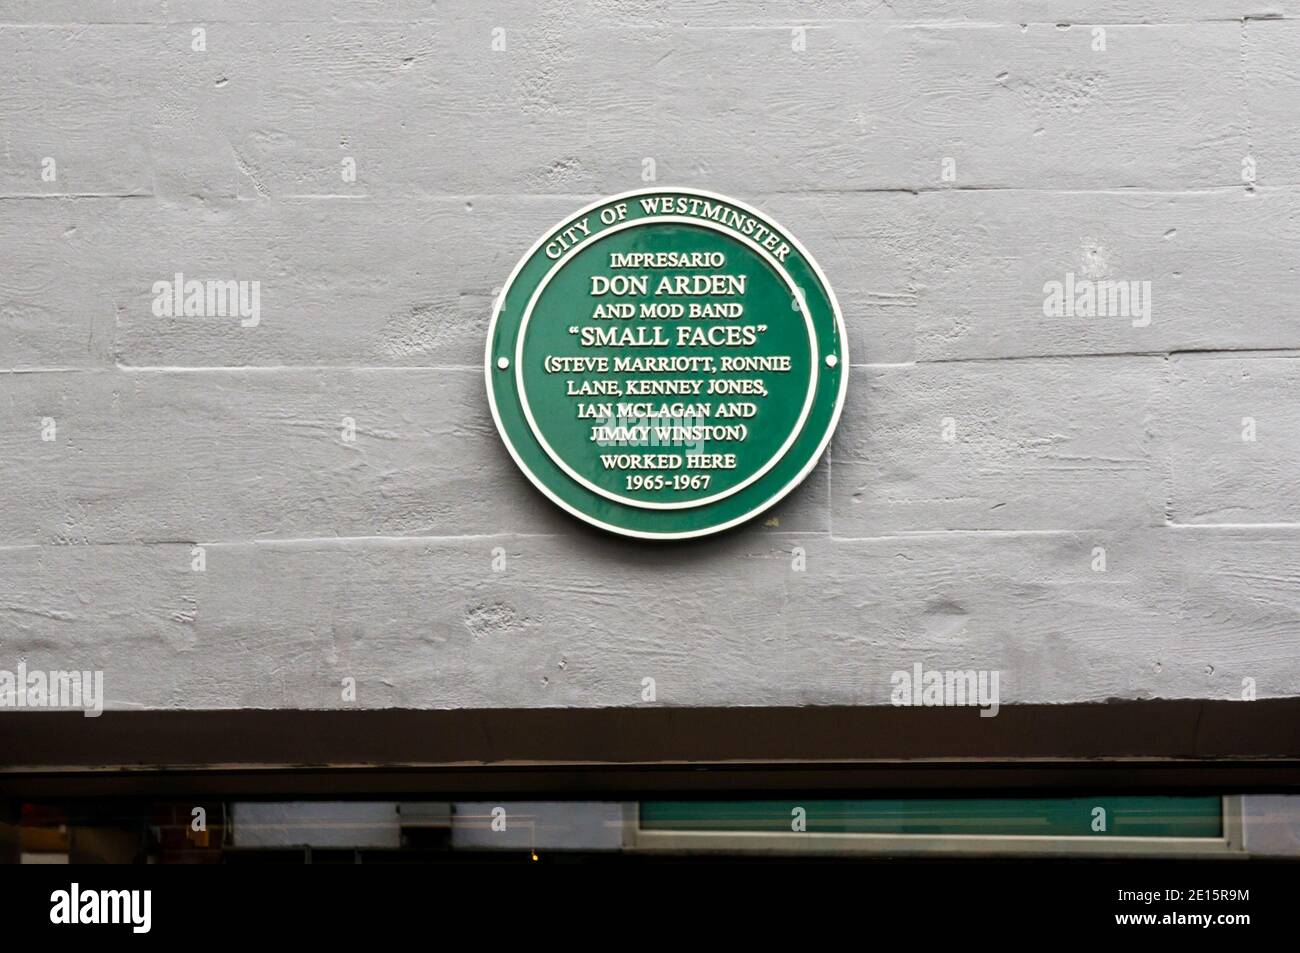 A green plaque in Carnaby Street commemorates the Mod band Small Faces & the impressario Don Arden. Stock Photo